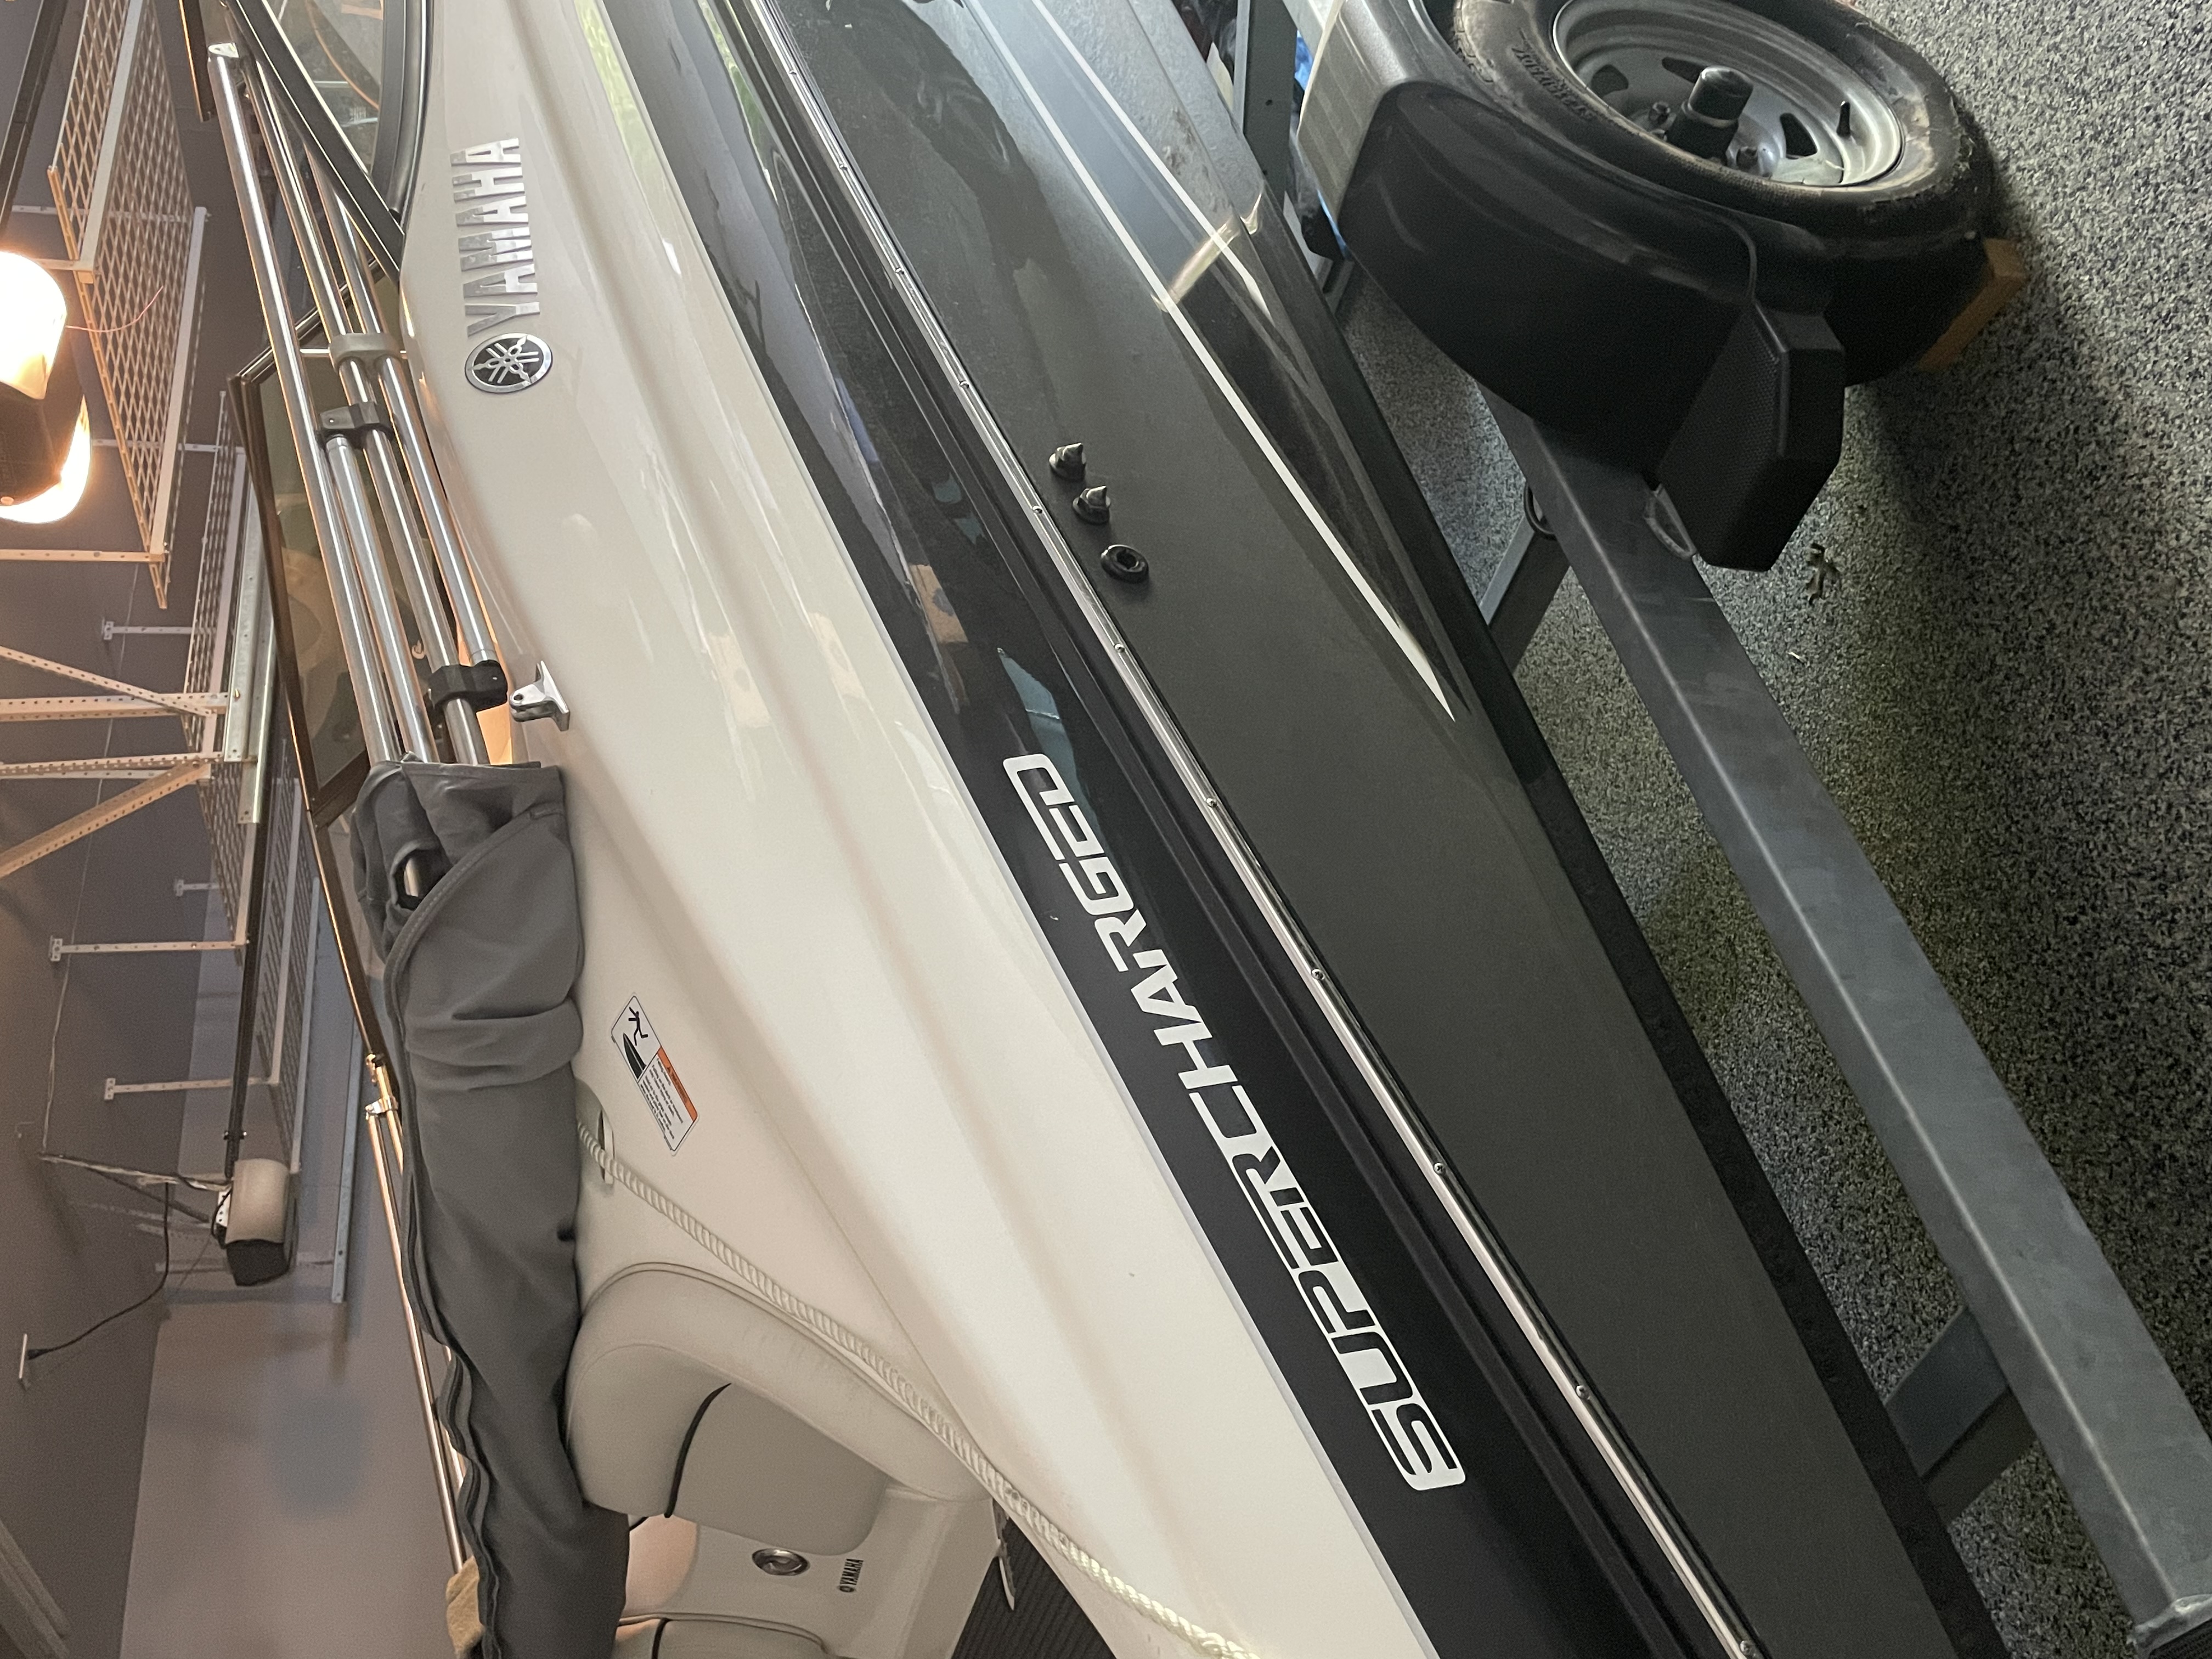 2014 Yamaha SX192 Power boat for sale in Dallas, TX - image 2 